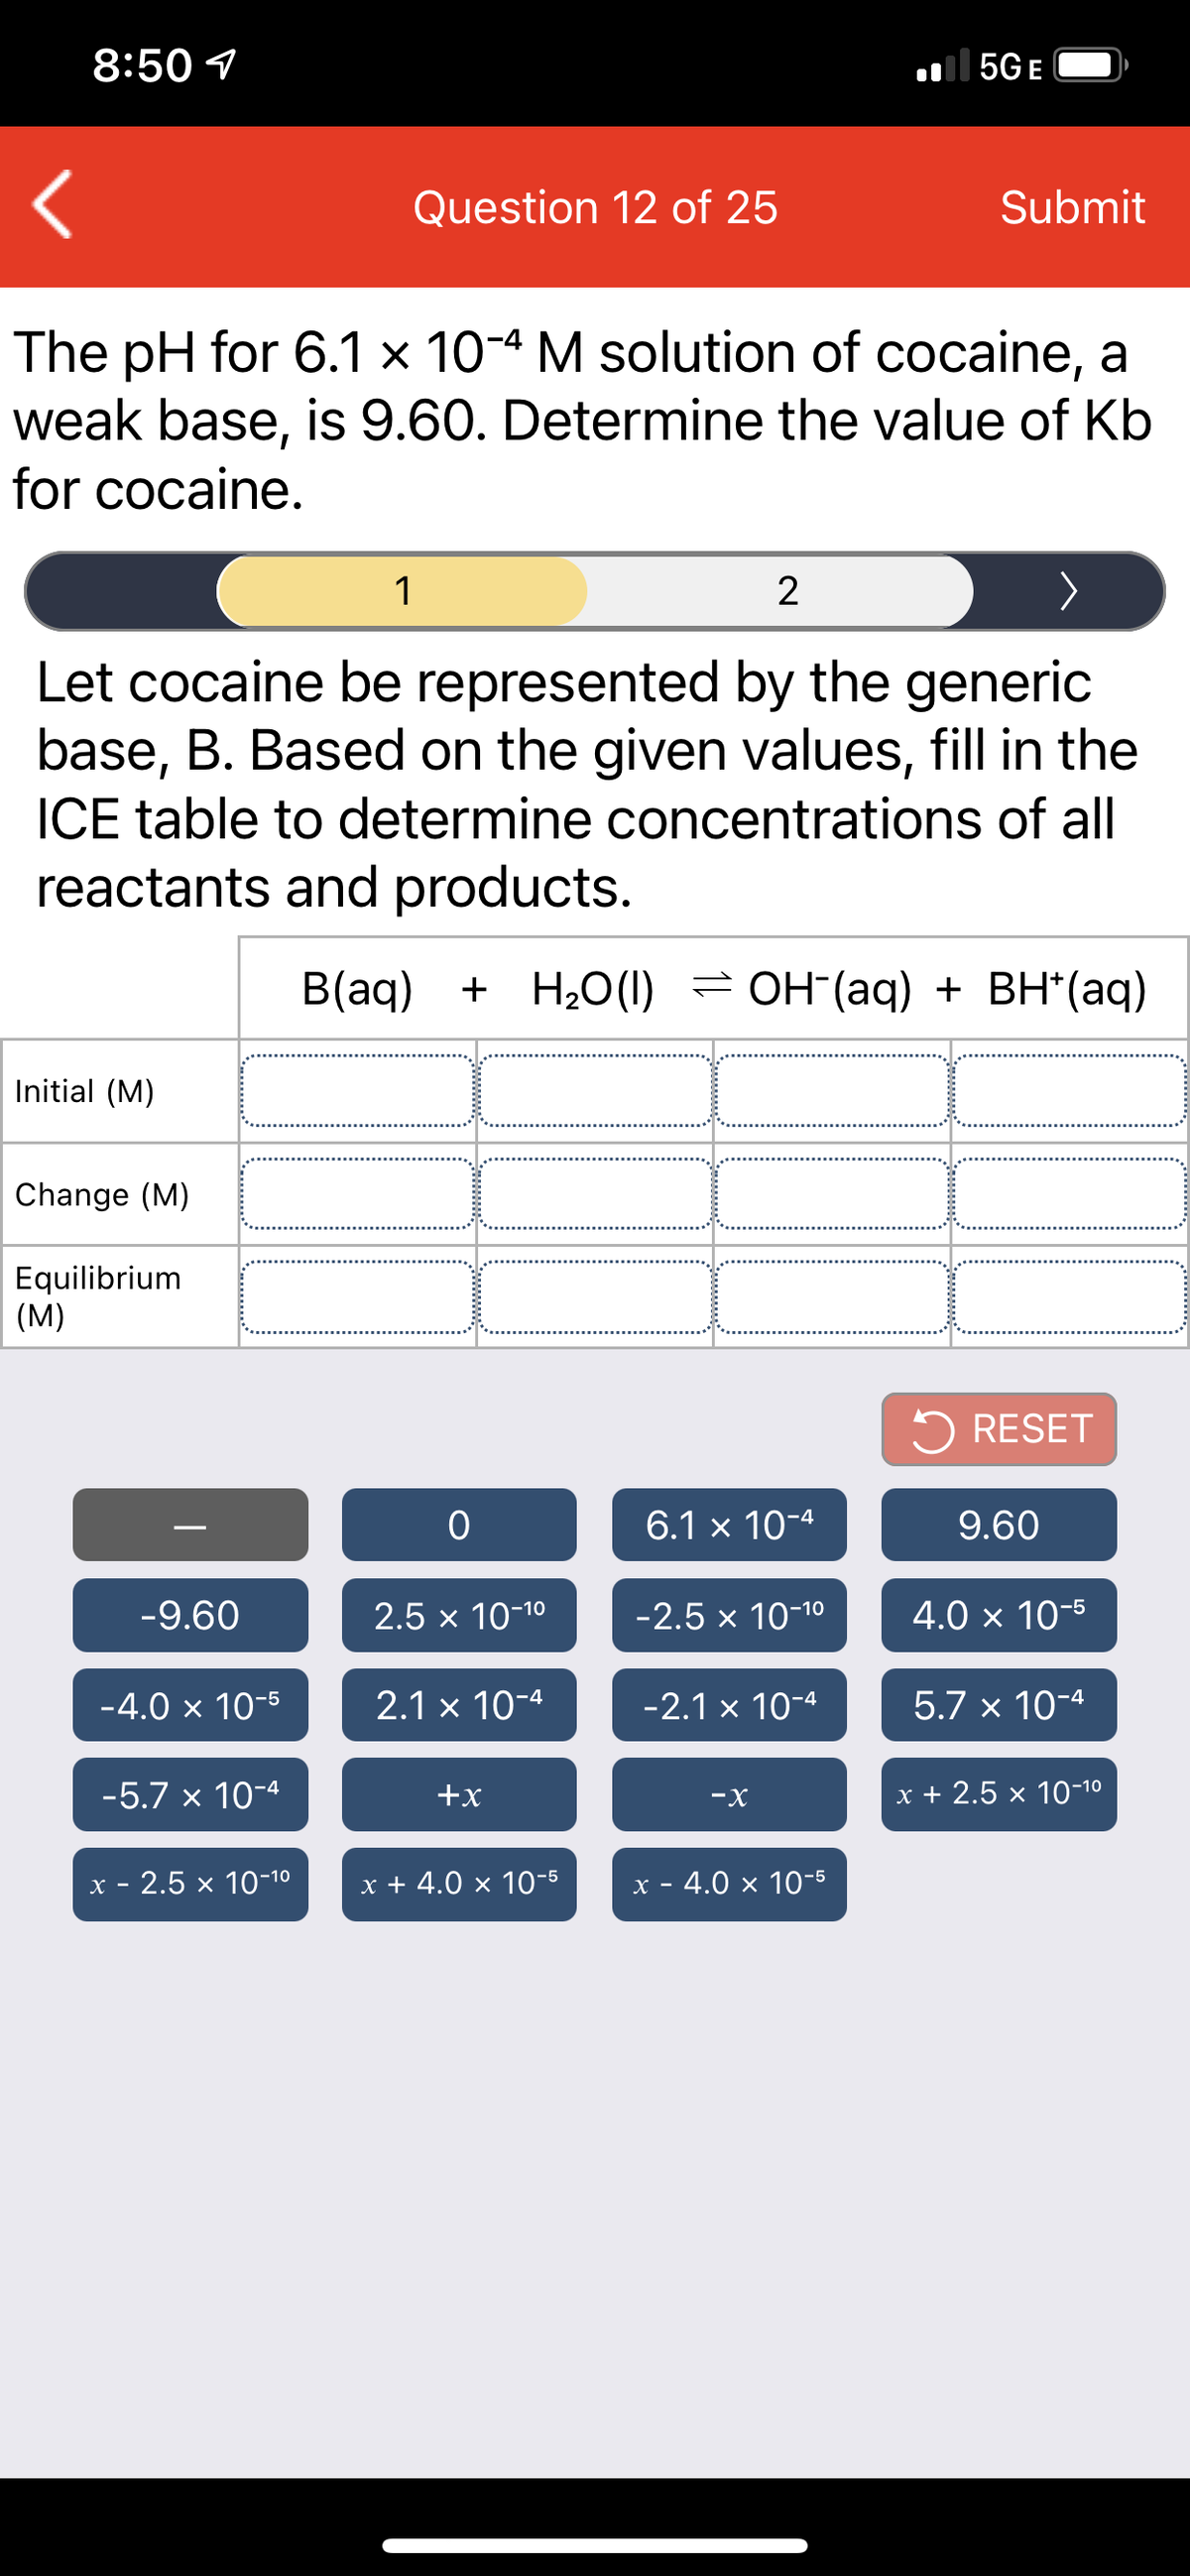 8:50 1
| 5G E
Question 12 of 25
Submit
The pH for 6.1 x 10-4 M solution of cocaine, a
weak base, is 9.60. Determine the value of Kb
for cocaine.
1
2
Let cocaine be represented by the generic
base, B. Based on the given values, fill in the
ICE table to determine concentrations of all
reactants and products.
B(aq) + H2O (1) = OH (aq) + BH*(aq)
Initial (M)
Change (M)
Equilibrium
(M)
5 RESET
6.1 x 10-4
9.60
-9.60
2.5 x 10-10
-2.5 x 10-10
4.0 × 10-5
-4.0 x 10-5
2.1 × 10-4
-2.1 x 10-4
5.7 x 10-4
-5.7 x 10-4
+x
-X
x + 2.5 x 10-10
х - 2.5 х 10-10
x + 4.0 × 10-5
x - 4.0 x 10-5
